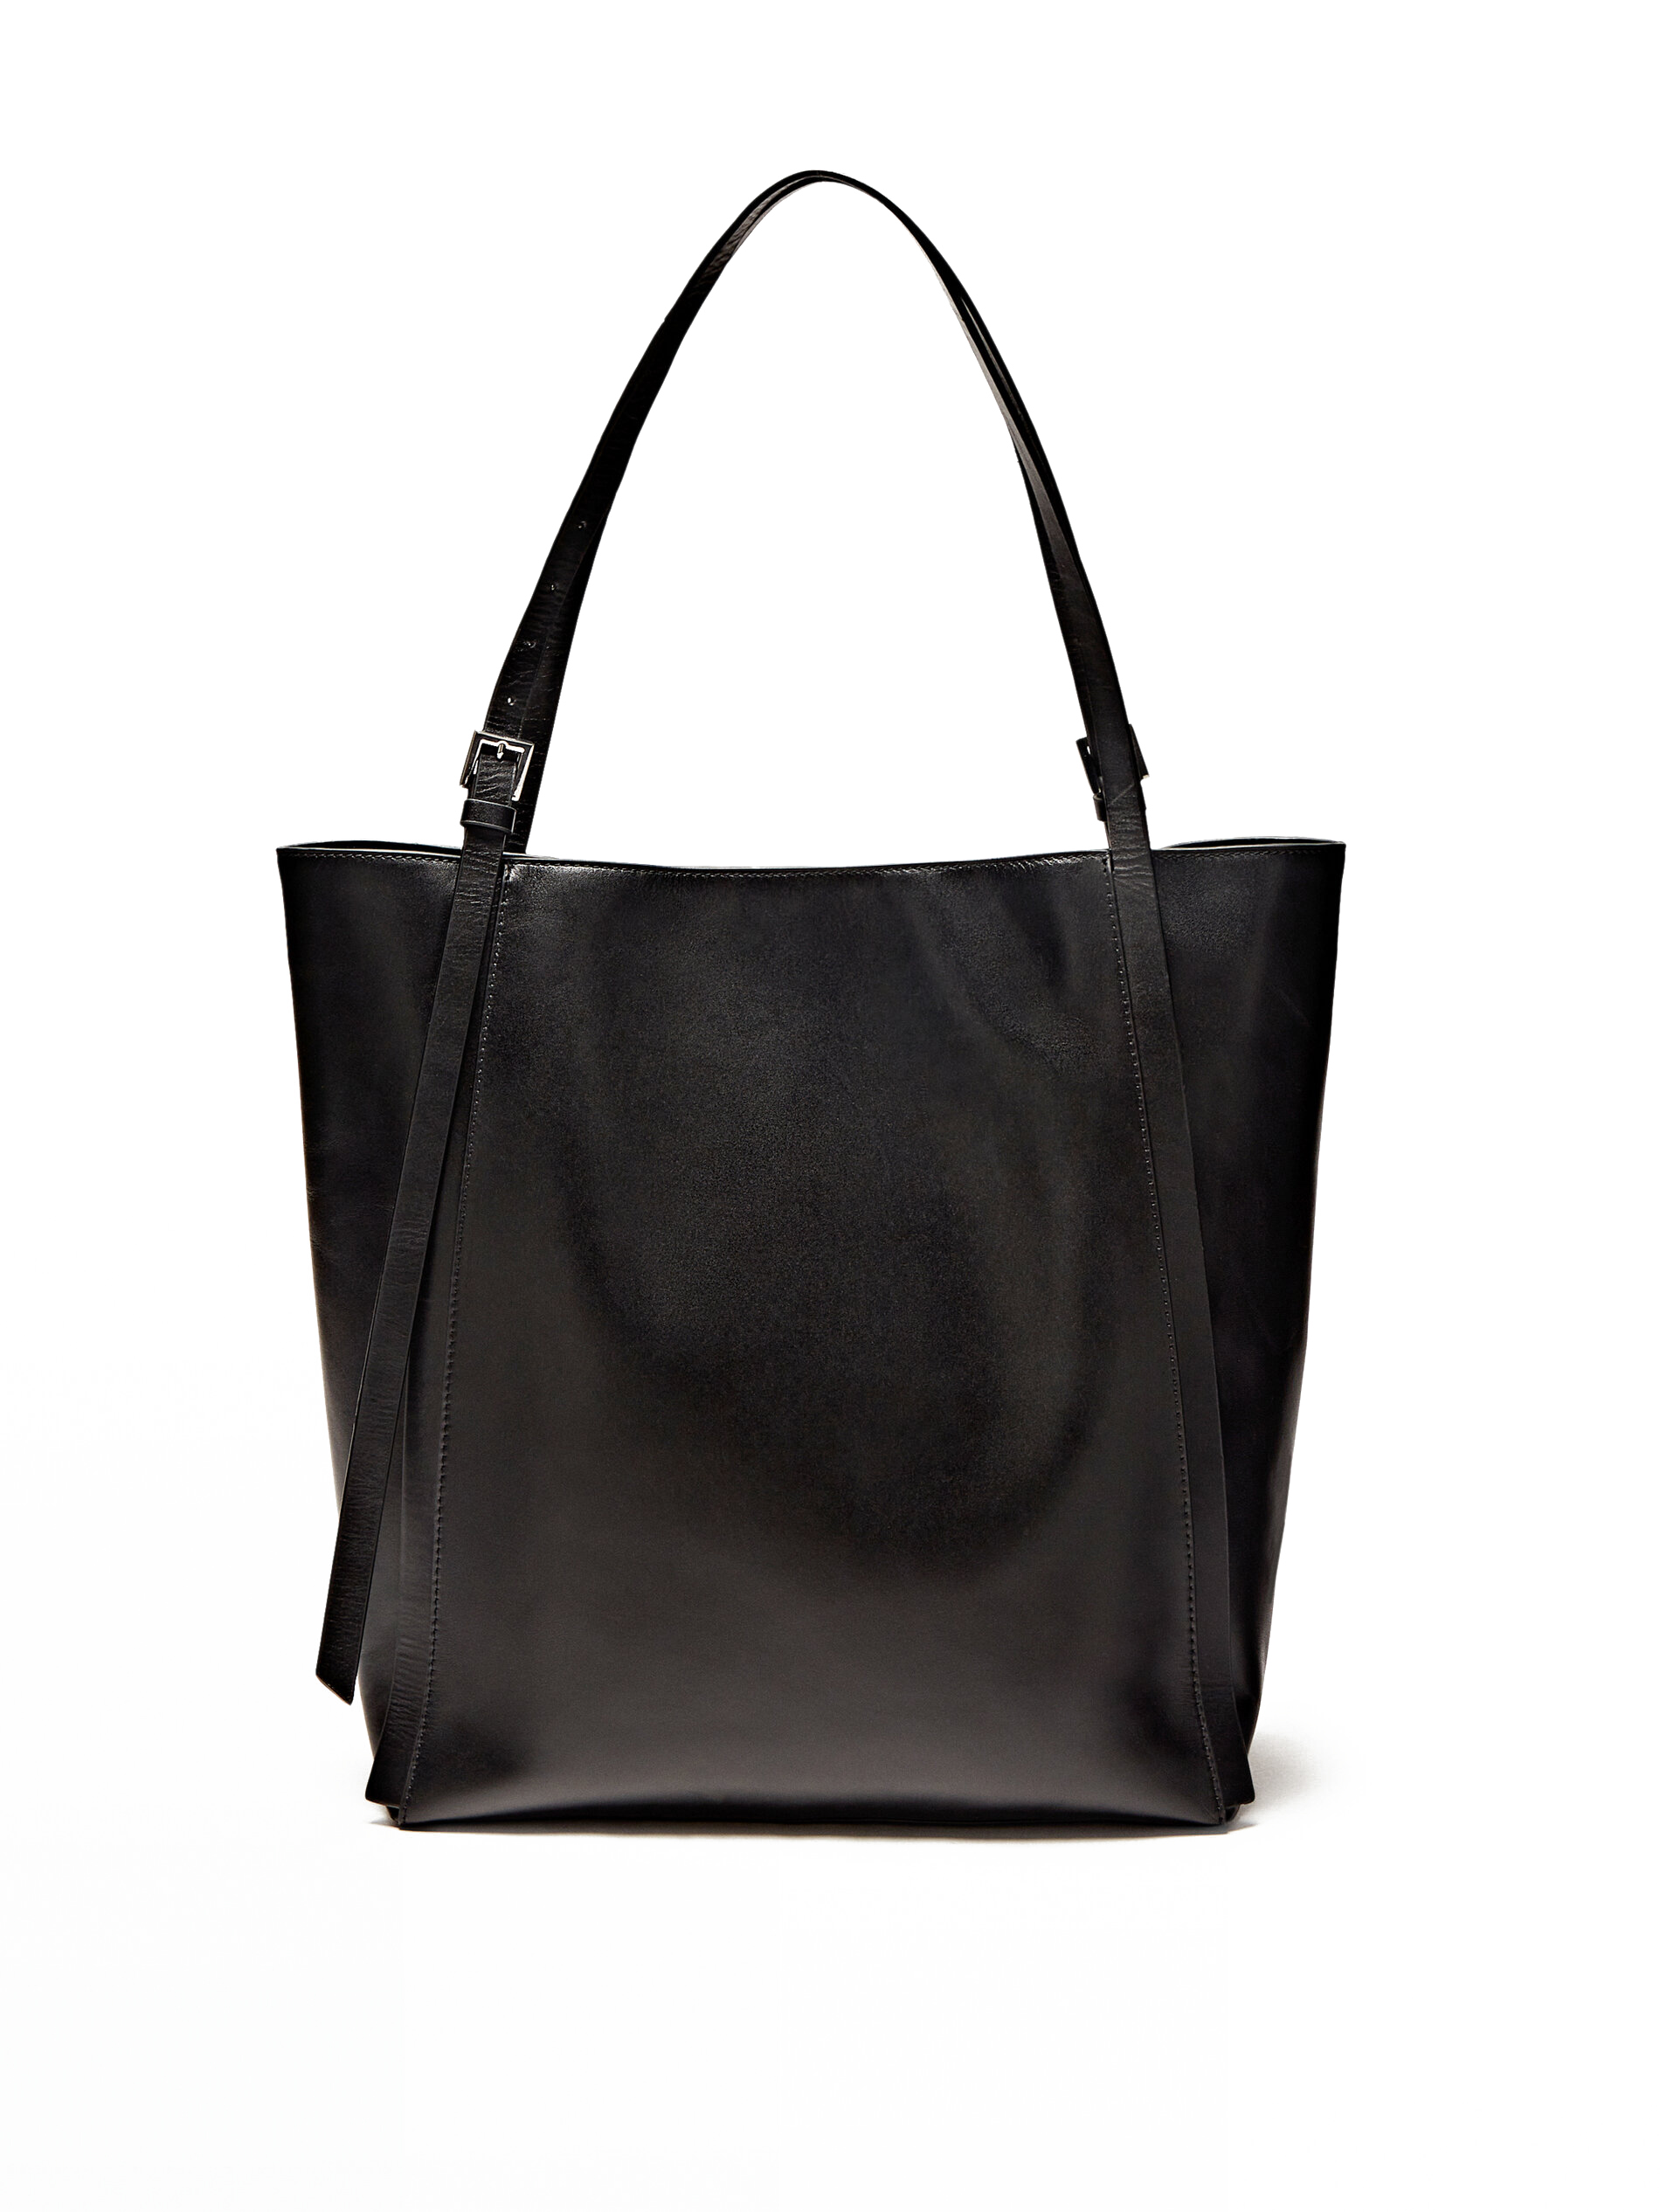 NAPPA LEATHER TOTE BAG WITH MULTI-WAY STRAP